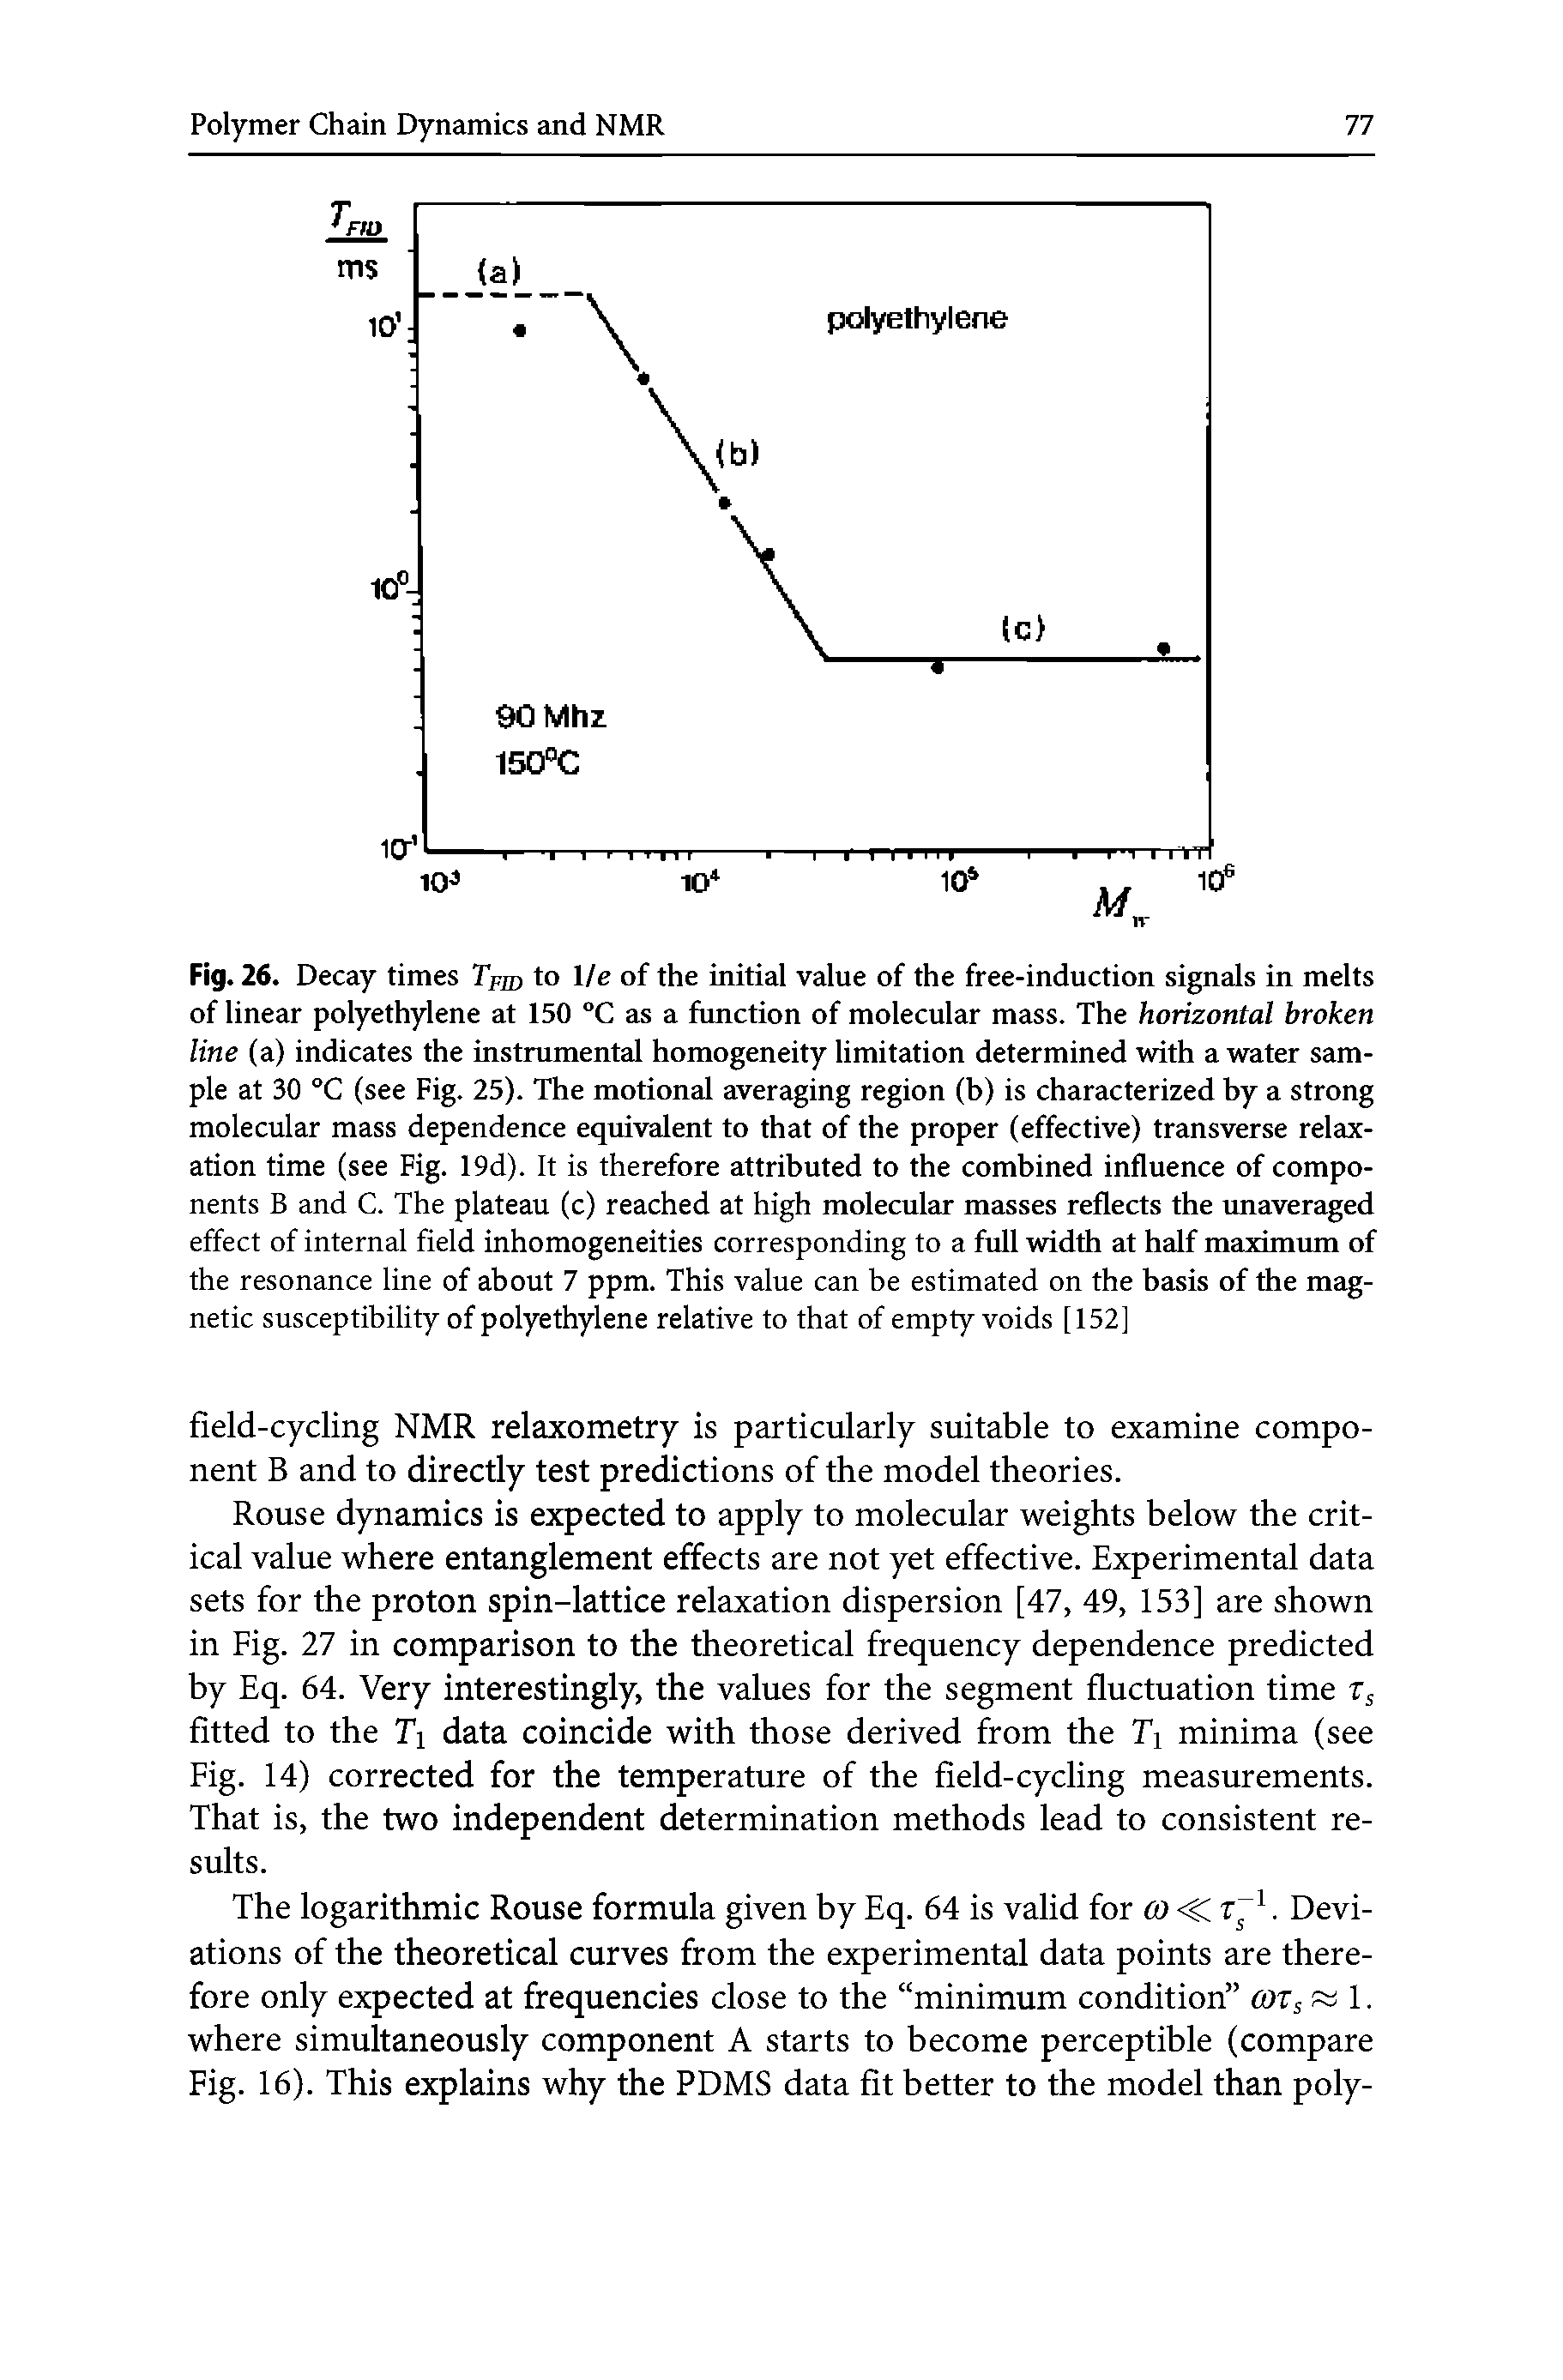 Fig. 26. Decay times Tpu) to 1/e of the initial value of the free-induction signals in melts of linear polyethylene at 150 "C as a fimction of molecular mass. The horizontal broken line (a) indicates the instrumental homogeneity limitation determined with a water sample at 30 °C (see Fig. 25). The motional averaging region (b) is characterized by a strong molecular mass dependence equivalent to that of the proper (effective) transverse relaxation time (see Fig. 19d). It is therefore attributed to the combined influence of components B and C. The plateau (c) reached at high molecular masses reflects the unaveraged effect of internal field inhomogeneities corresponding to a full width at half maximum of the resonance line of about 7 ppm. This value can be estimated on the basis of the magnetic susceptibility of polyethylene relative to that of empty voids [152]...